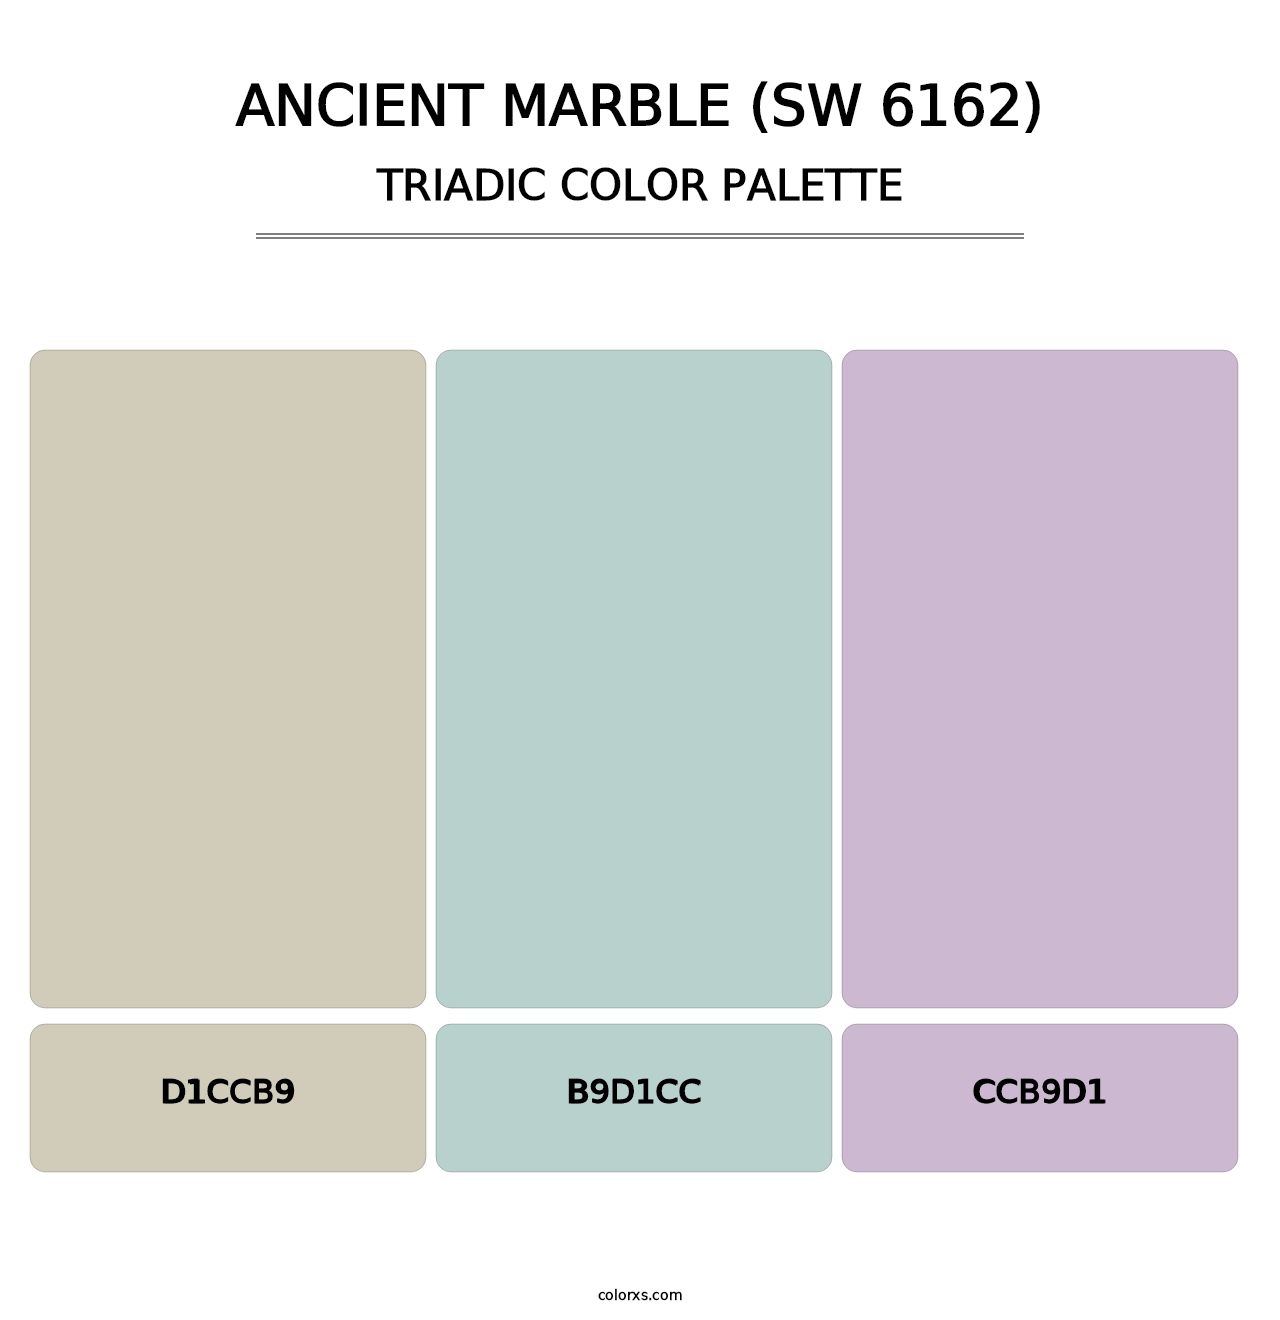 Ancient Marble (SW 6162) - Triadic Color Palette